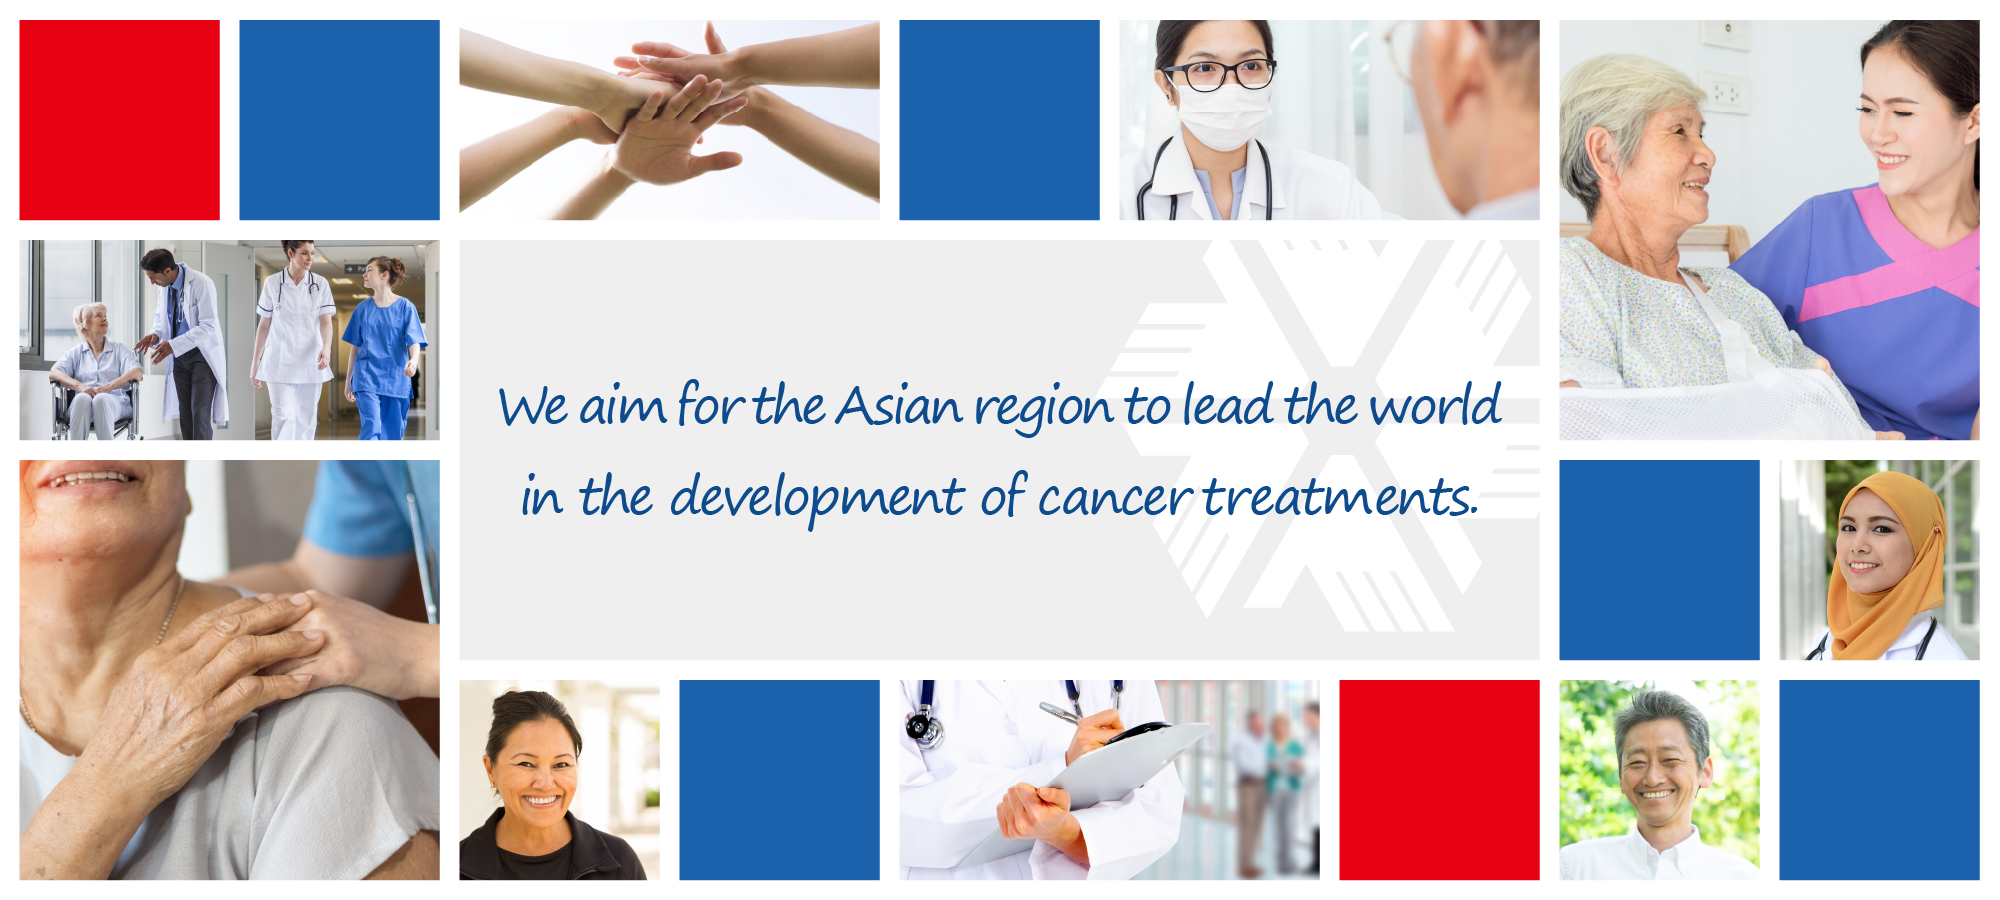 We aim for the Asian region to lead the world in the development of cancer treatments.